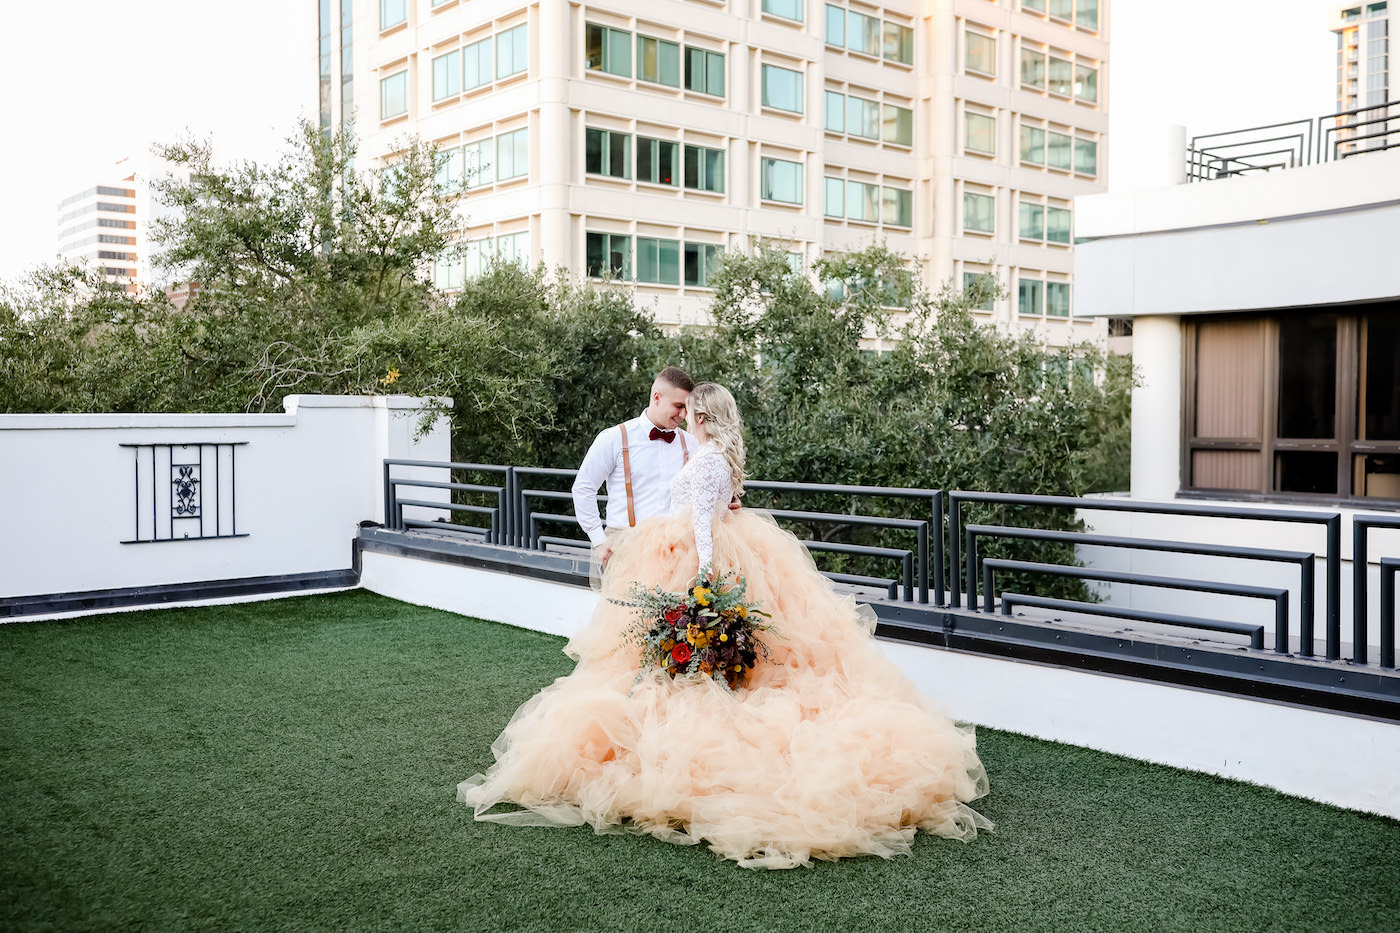 Bohemian Inspired Tampa Bay Bride and Groom Wedding Portrait, In front of Ceremony Backdrop on Outdoor Balcony with City View, Boho Bride Wearing Oversized Blush Orange Long Tulle Skirt, White Lace Long Sleeve Top, Holding Vintage Wildflower Bouquet, with Orange, Purple, Yellow, Red, Eggplant and Ivory Floral Stems, Thistle, Roses, Groom in Brown Suit with Velvet Bowtie | Tampa Bay Wedding Planner Blue Skies Weddings and Events | Downtown St. Petersburg Wedding Photographer Lifelong Photography Studio | Unique Florida Wedding Venue Station House in DTSP